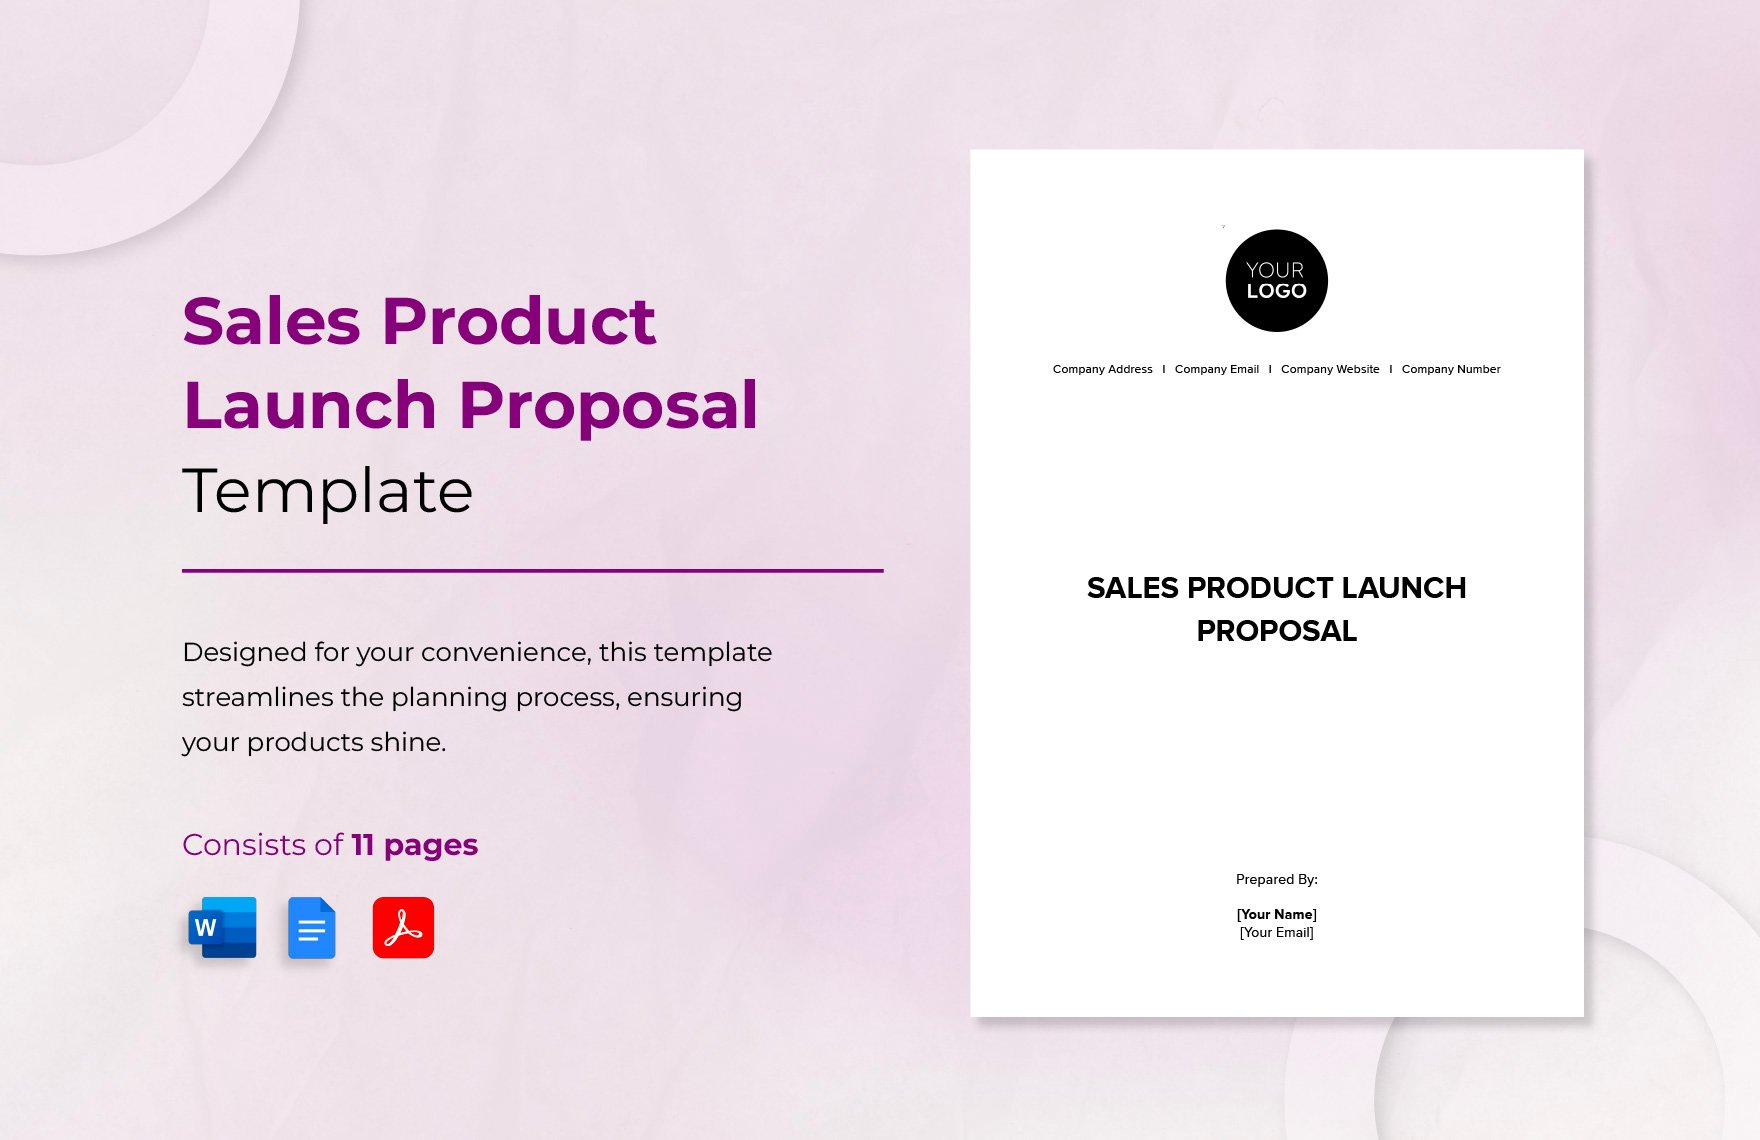 Sales Product Launch Proposal Template